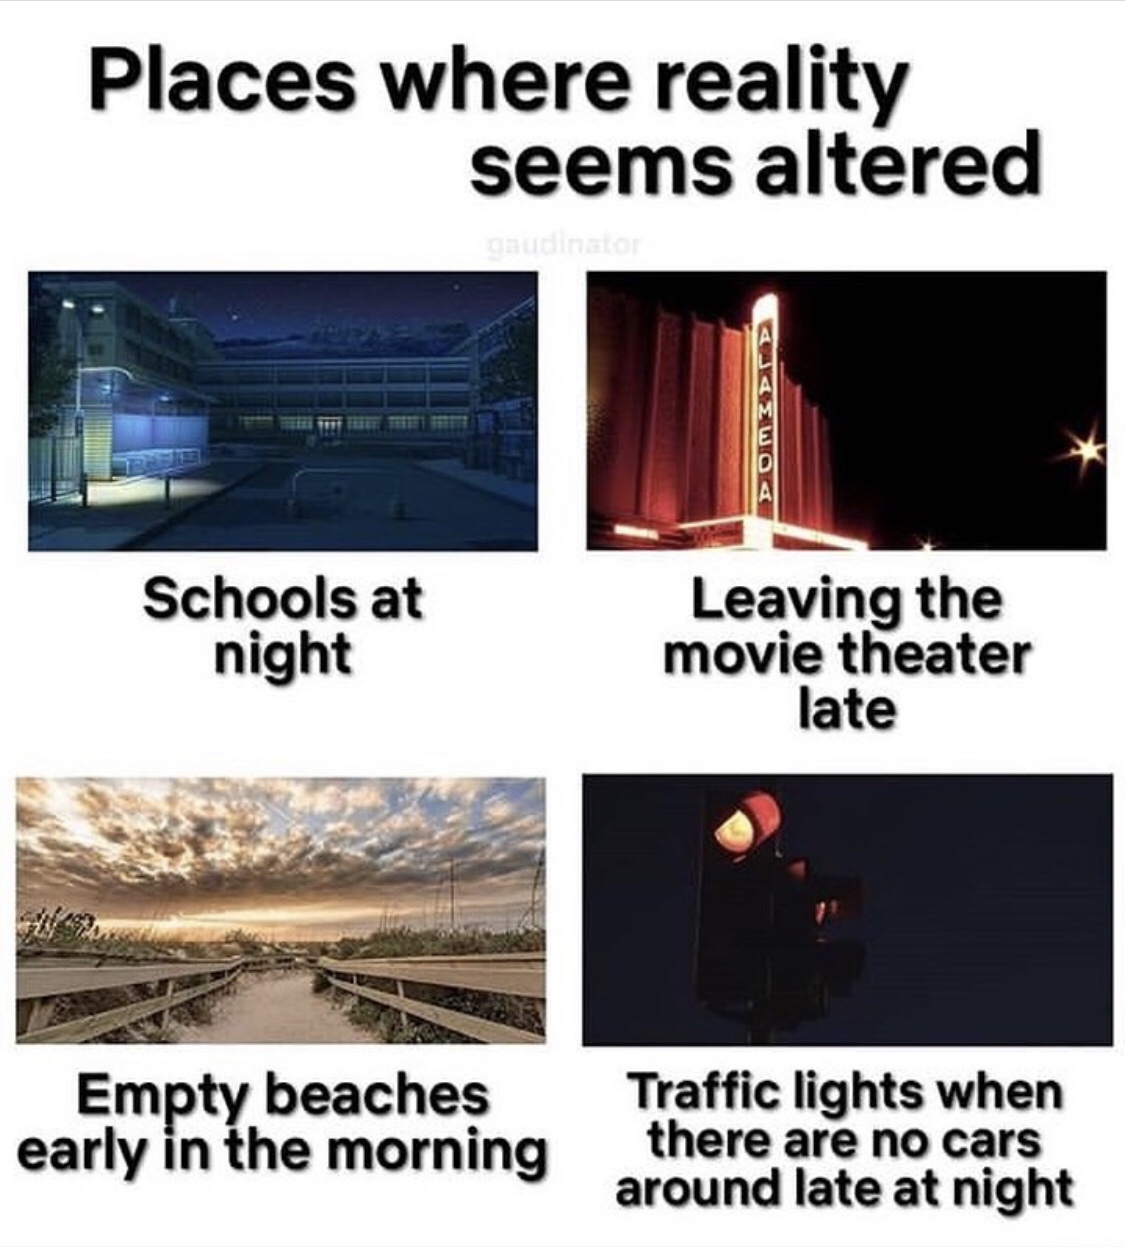 altered reality places - Places where reality seems altered gaudimo Schools at night Leaving the movie theater late Empty beaches early in the morning Traffic lights when there are no cars around late at night